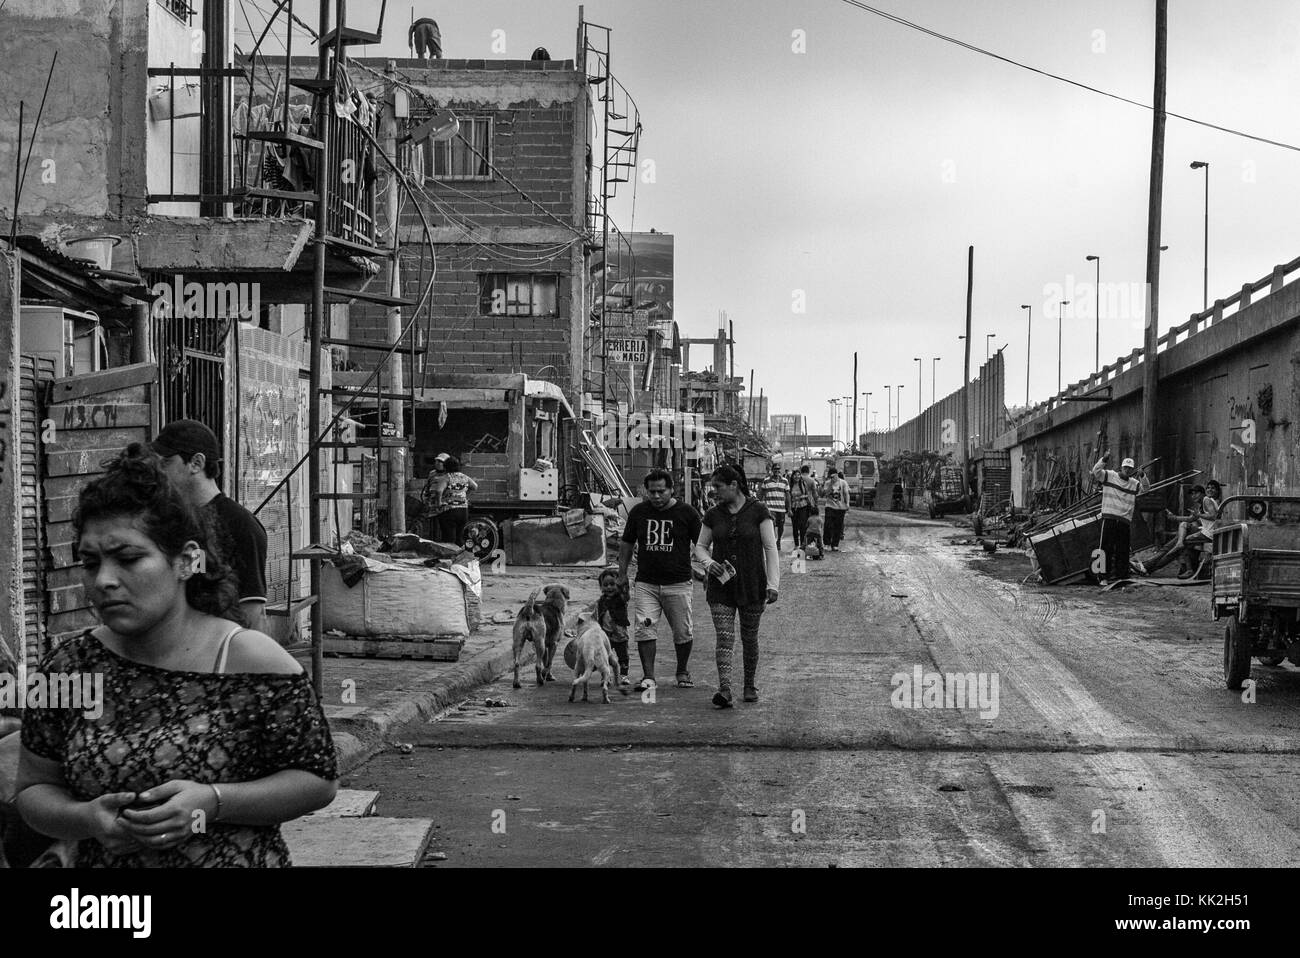 June 6, 2015 - Villa 31 today has a highly varied population of about 60,000 people composed not only of illegal immigrants but also porteÃ±e from young couples who can not afford other housing solution within the metropolis. Credit: Gabriele Orlini/ZUMA Wire/Alamy Live News Stock Photo